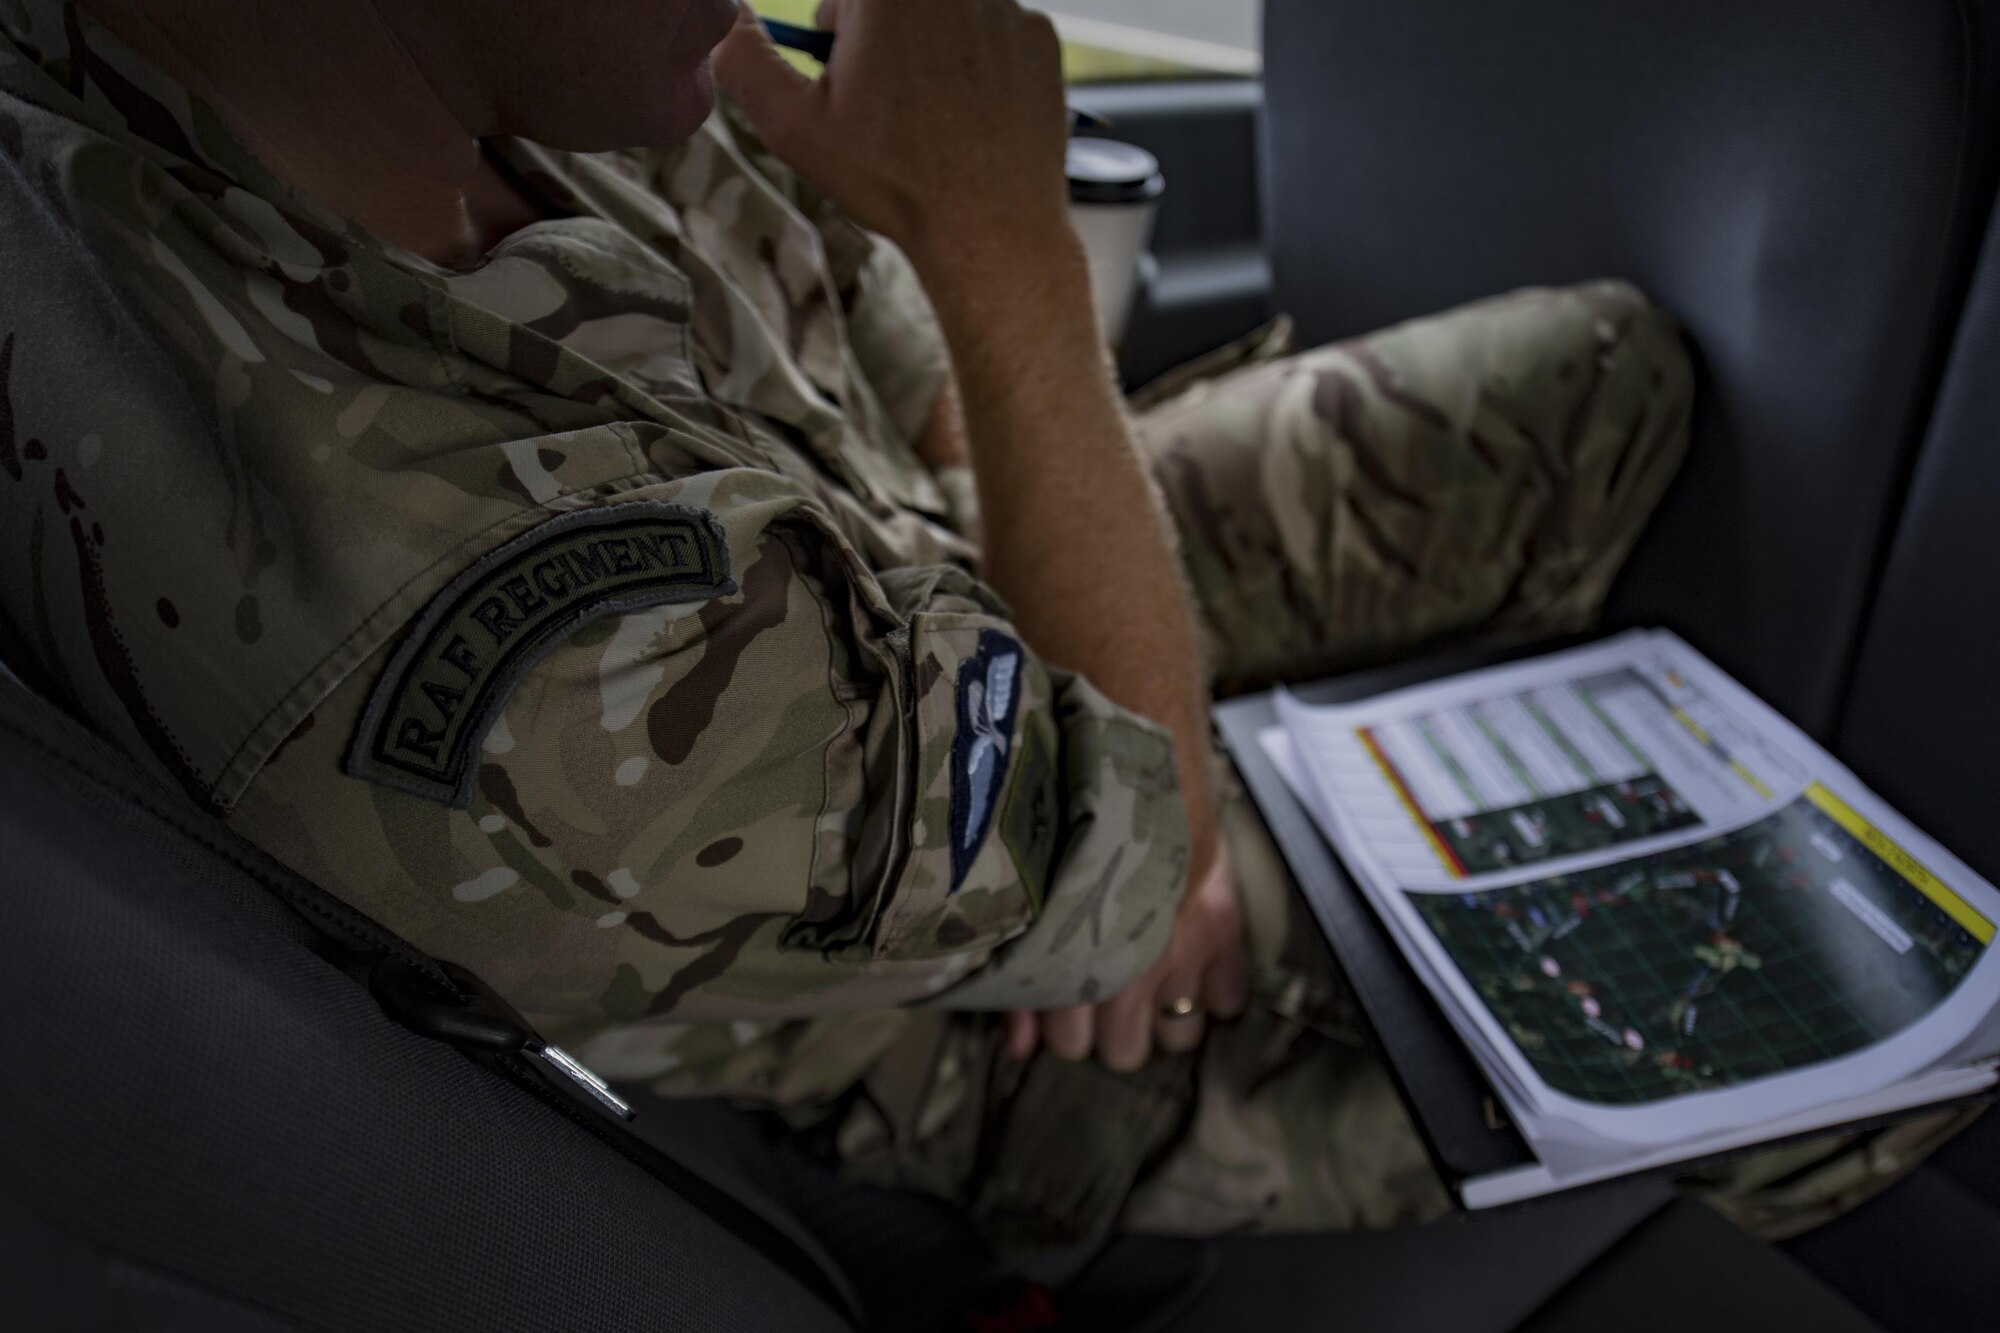 Royal Air Force Flight Sergeant Simon Ballard, chief instructor of the Air Land Integration Cell, listens in as joint terminal attack controllers communicate with 23d Fighter Group A-10C Thunderbolt IIs overhead during a close air support training exercise, July 26, 2017, in Lakeland, Ga. Two RAF members recently spent time with the 93d Air Ground Operations Wing to compare and contrast how each entity conducts business and to plan future coalition training events. (U.S. Air Force photo by Airman 1st Class Daniel Snider)